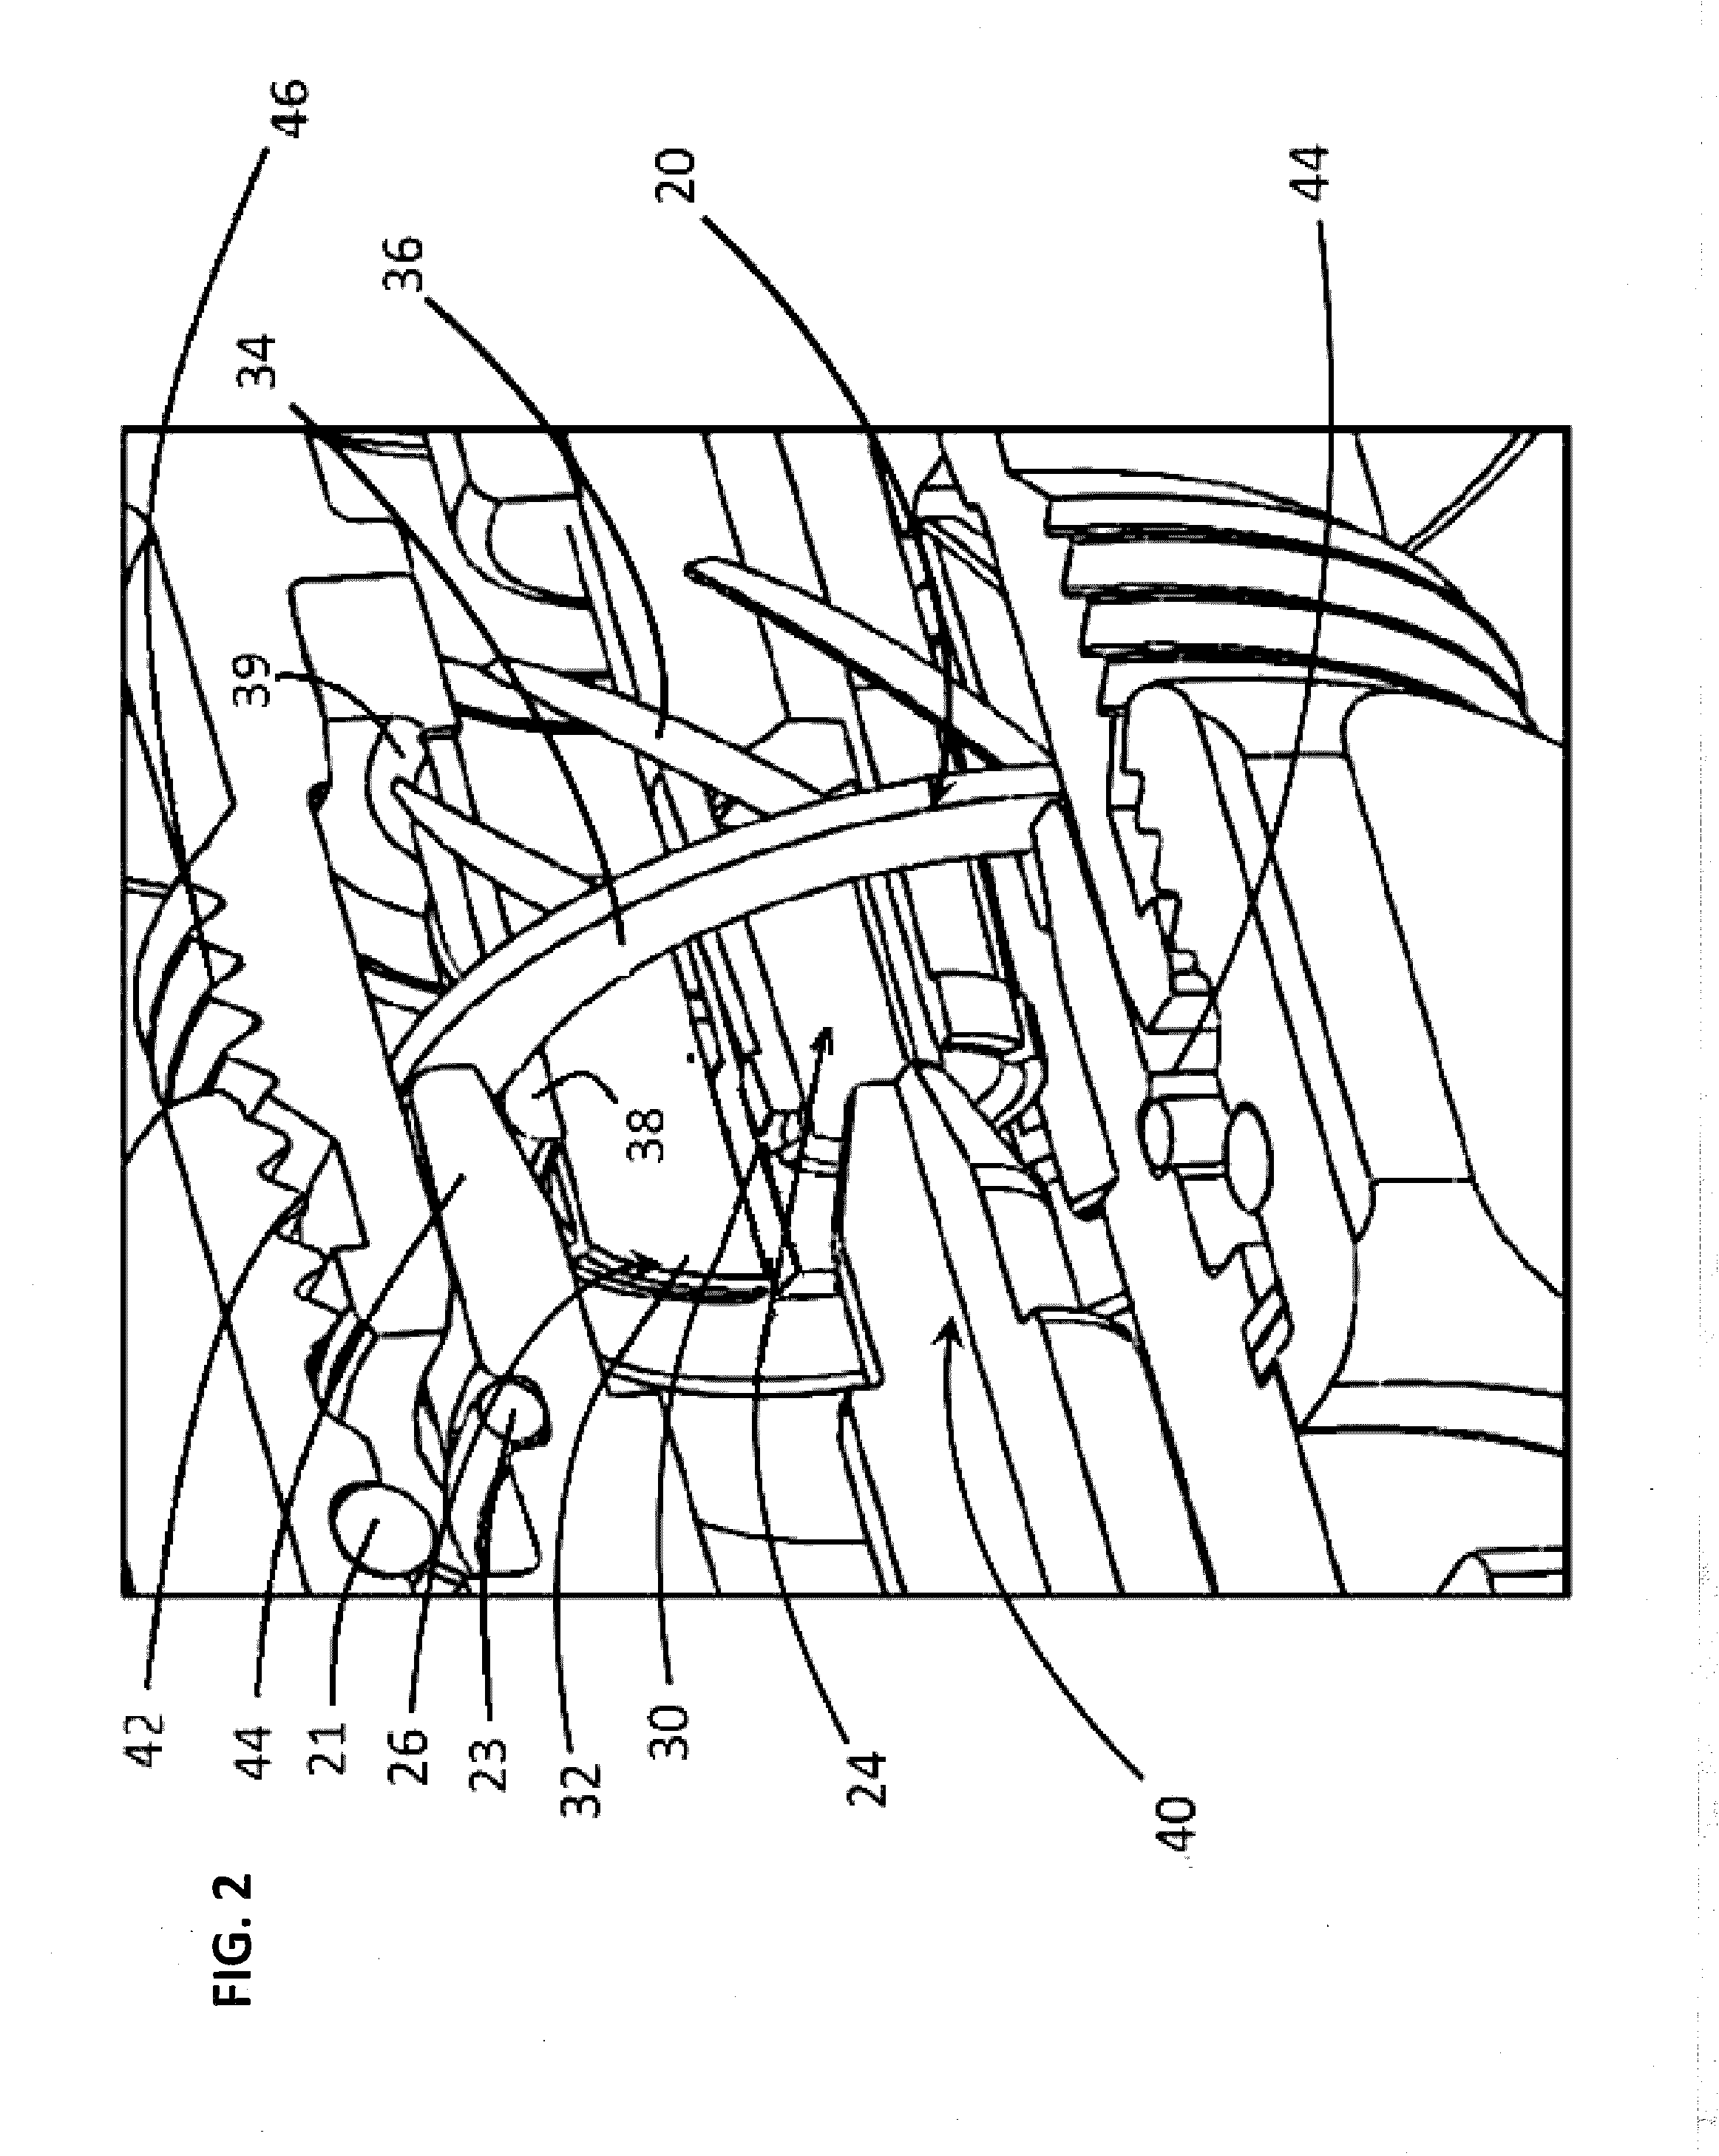 Device and method for  protecting spring-biased conductor elements